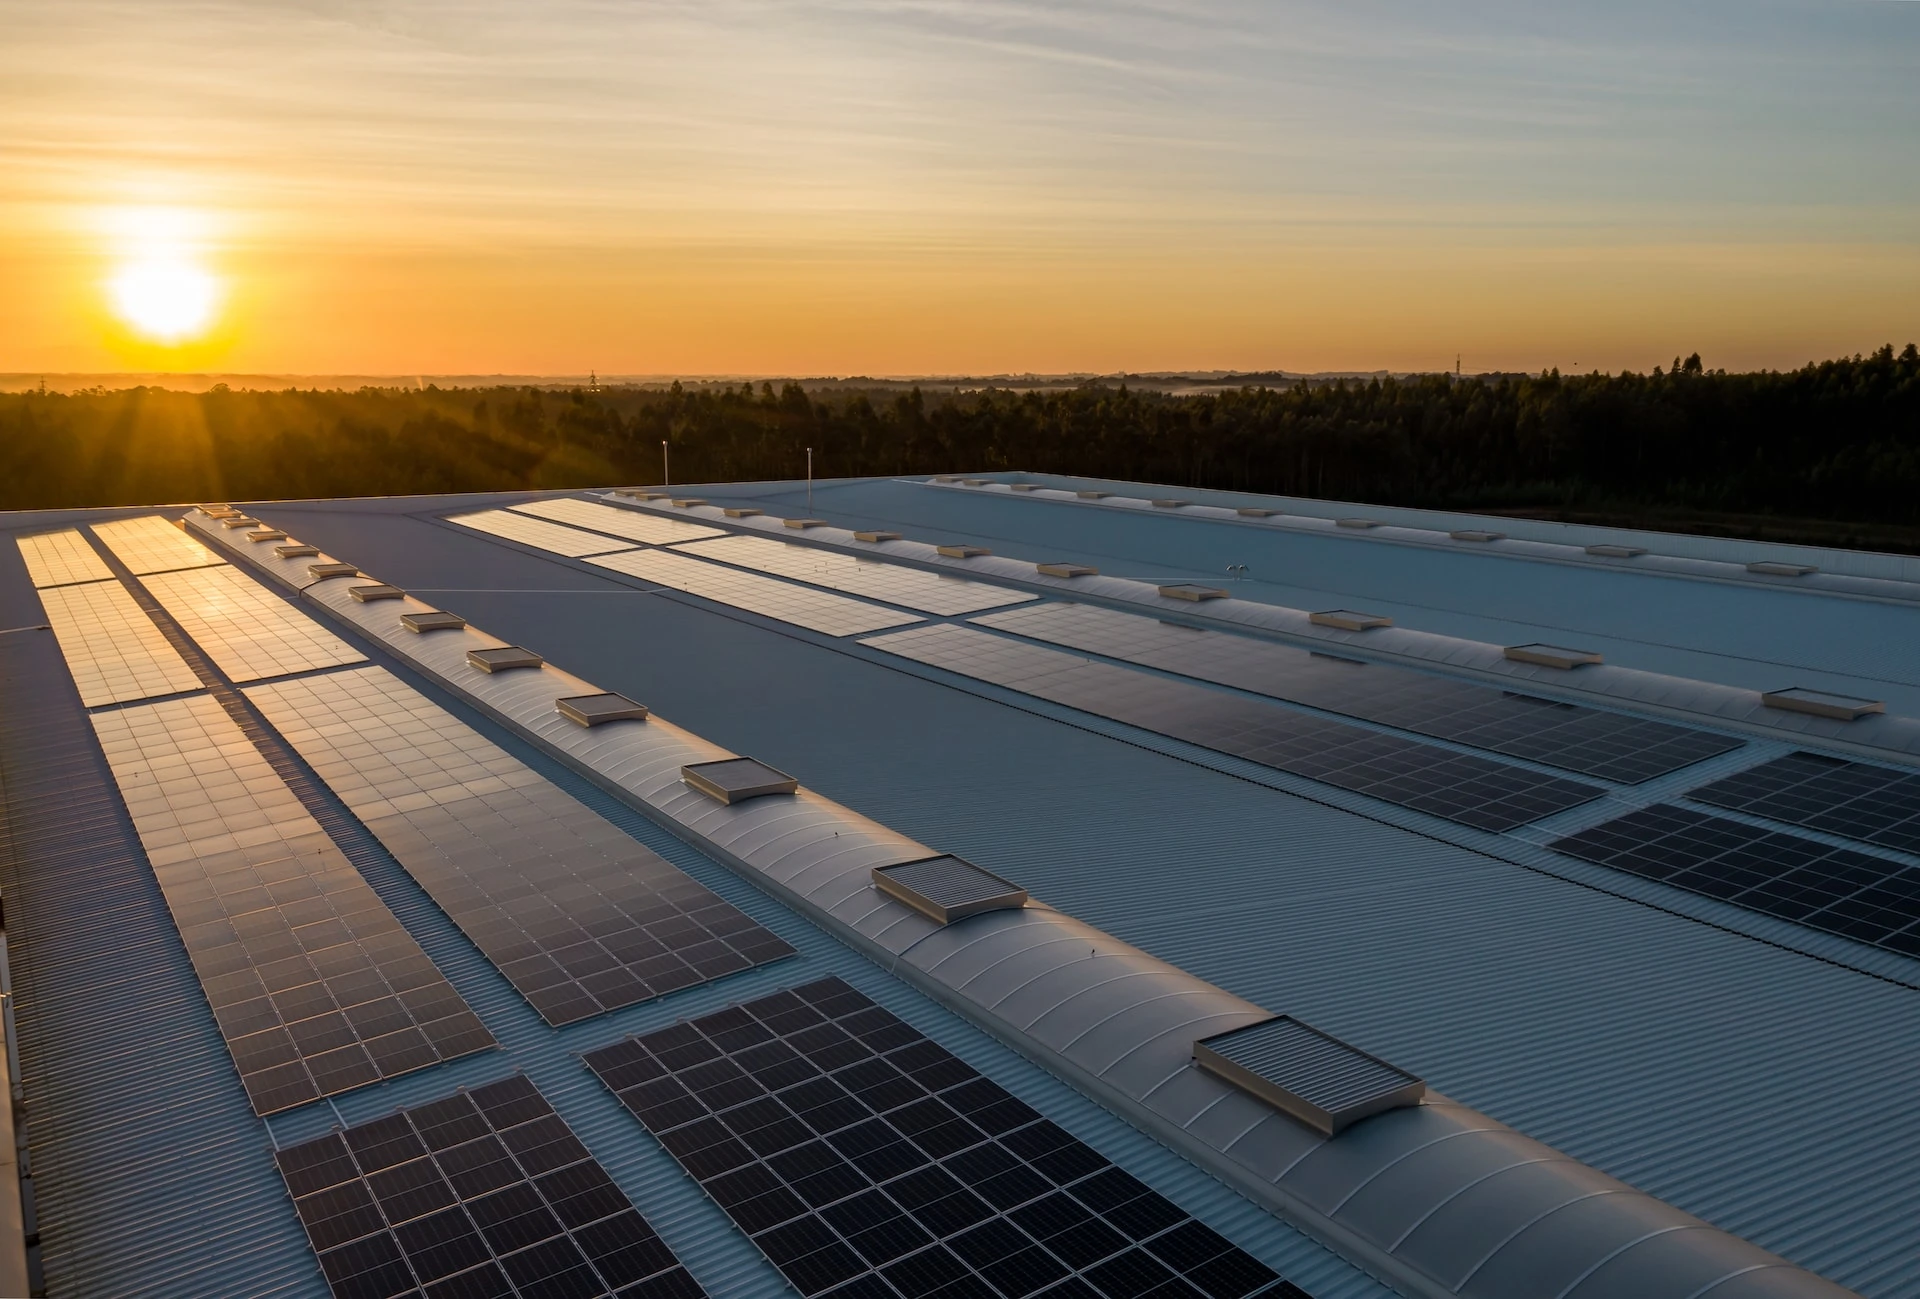 Higher power solar panels installed on a factory roof with an orange sunset setting in the background